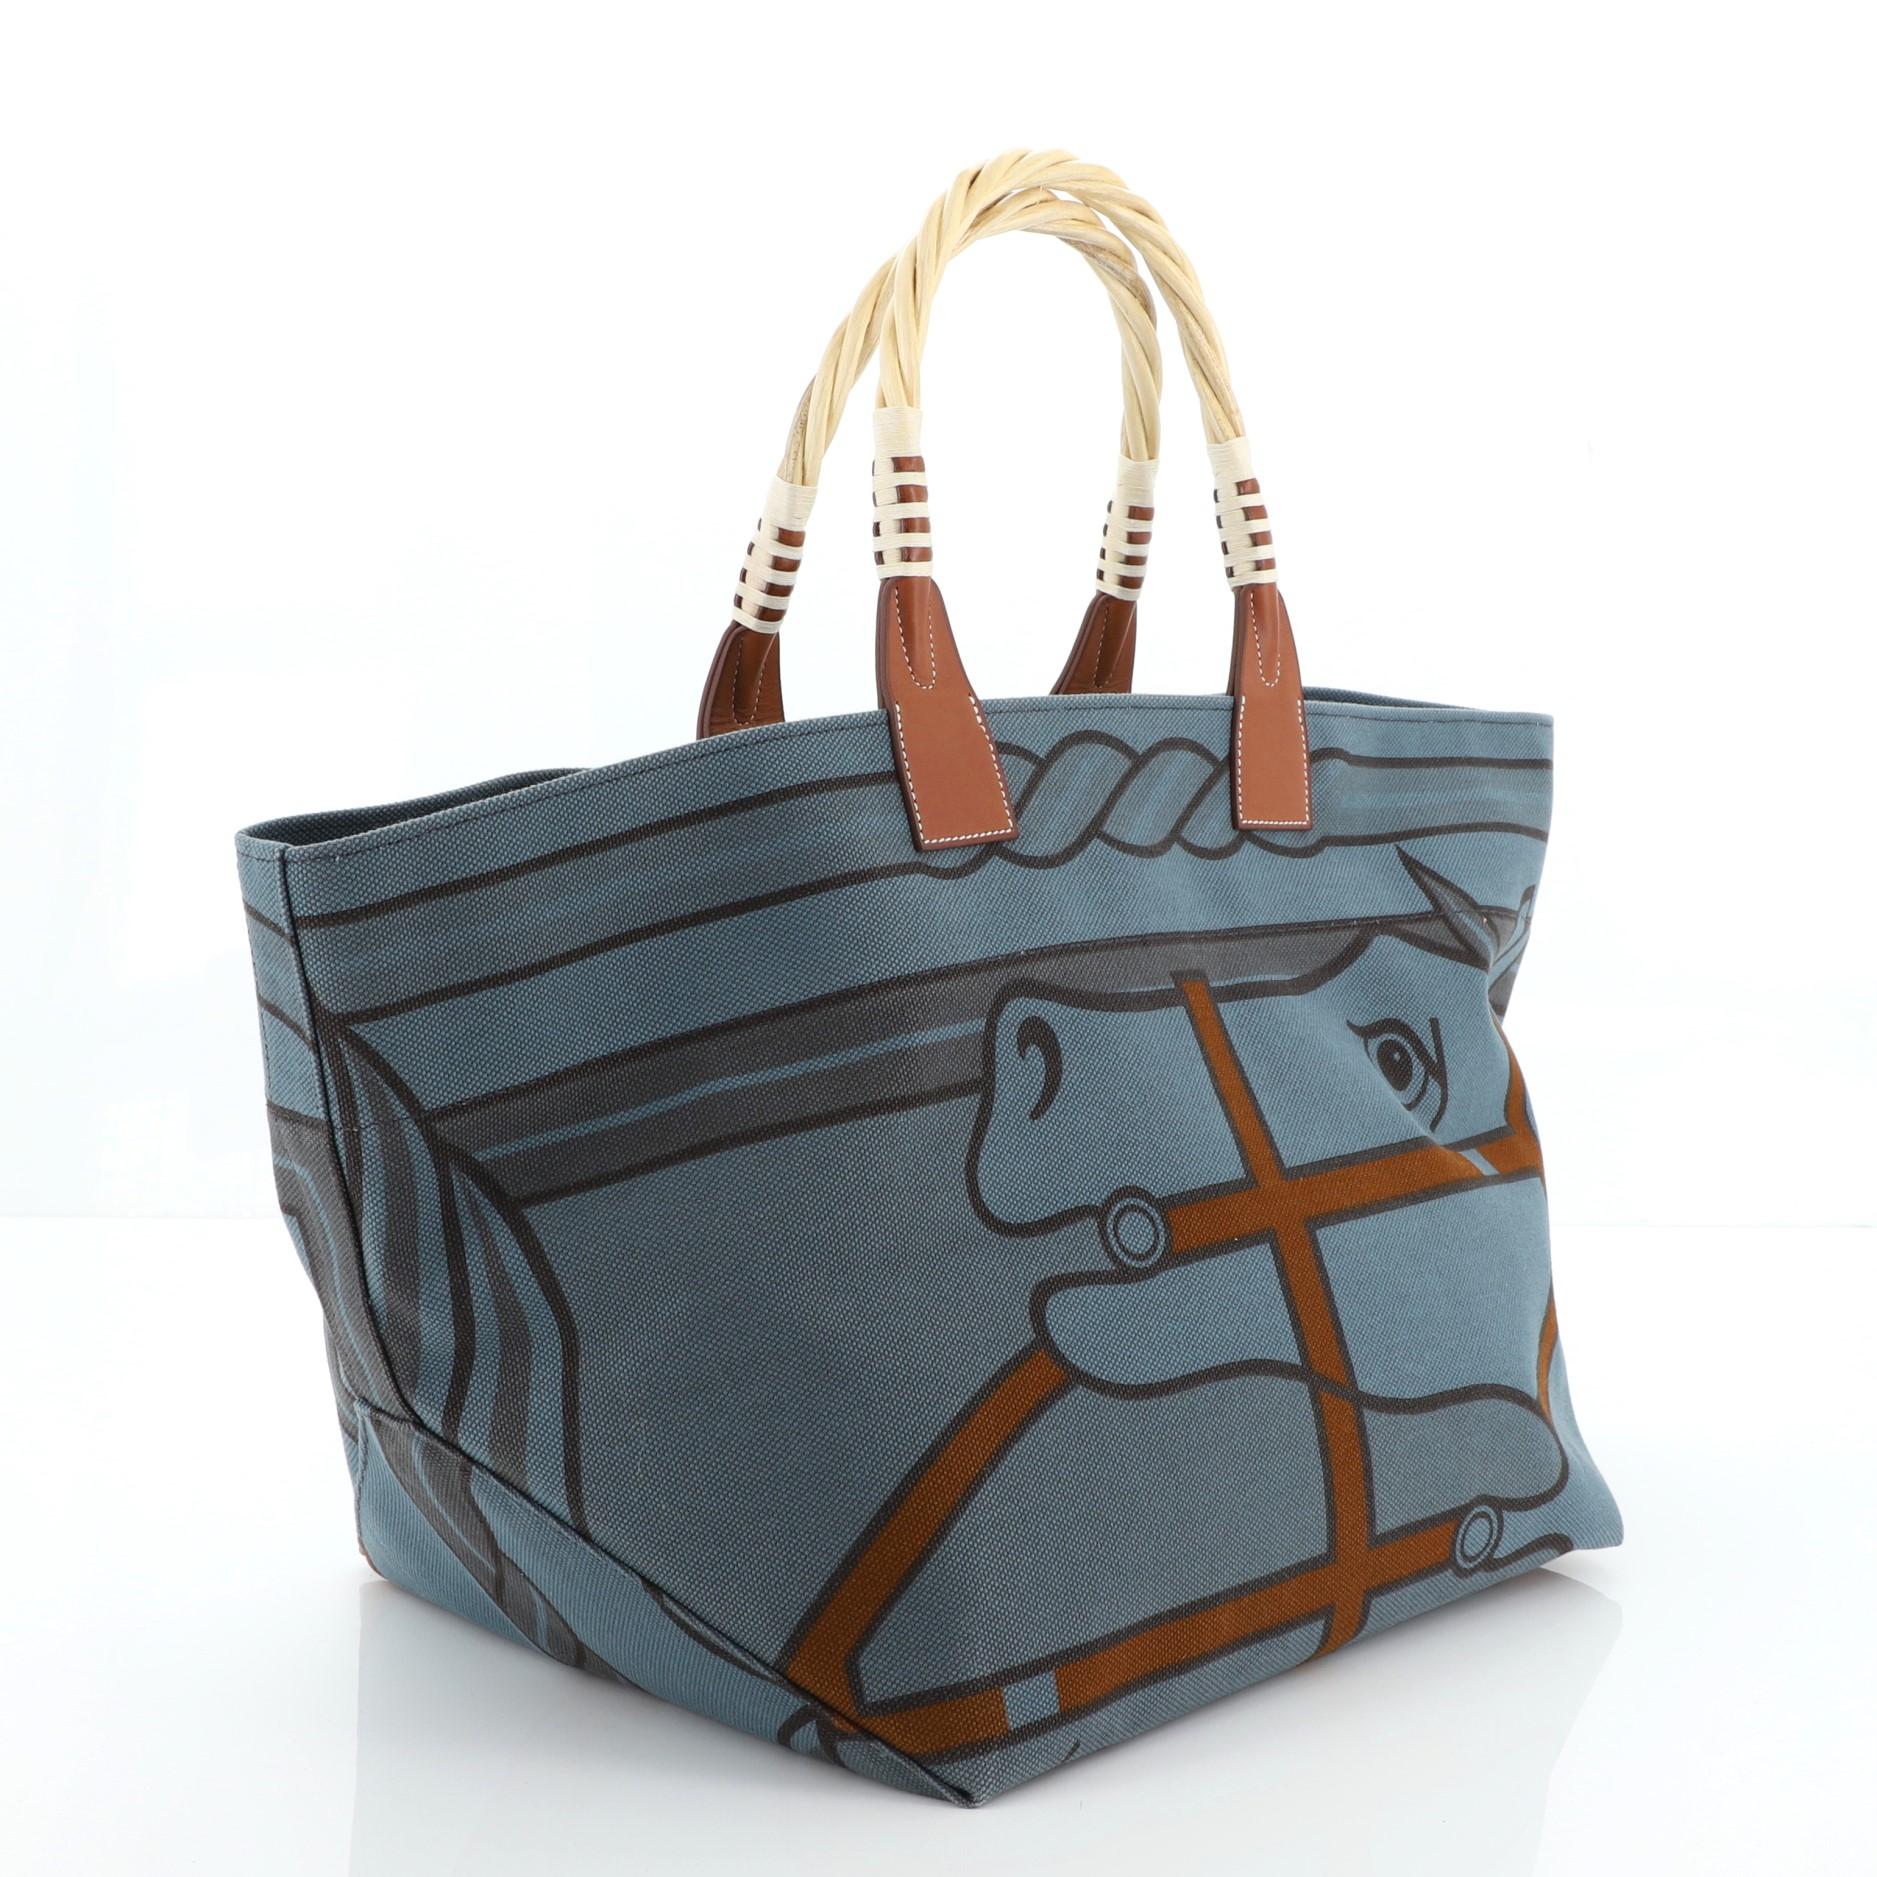 This Hermes Sac Steeple Tote Printed Toile with Wood, crafted from multicolor printed colvert Toile H and Fauve Barenia leather, features a graphic print design, dual wood top handles, and wood hardware. It opens to a colvert blue Toile H interior.